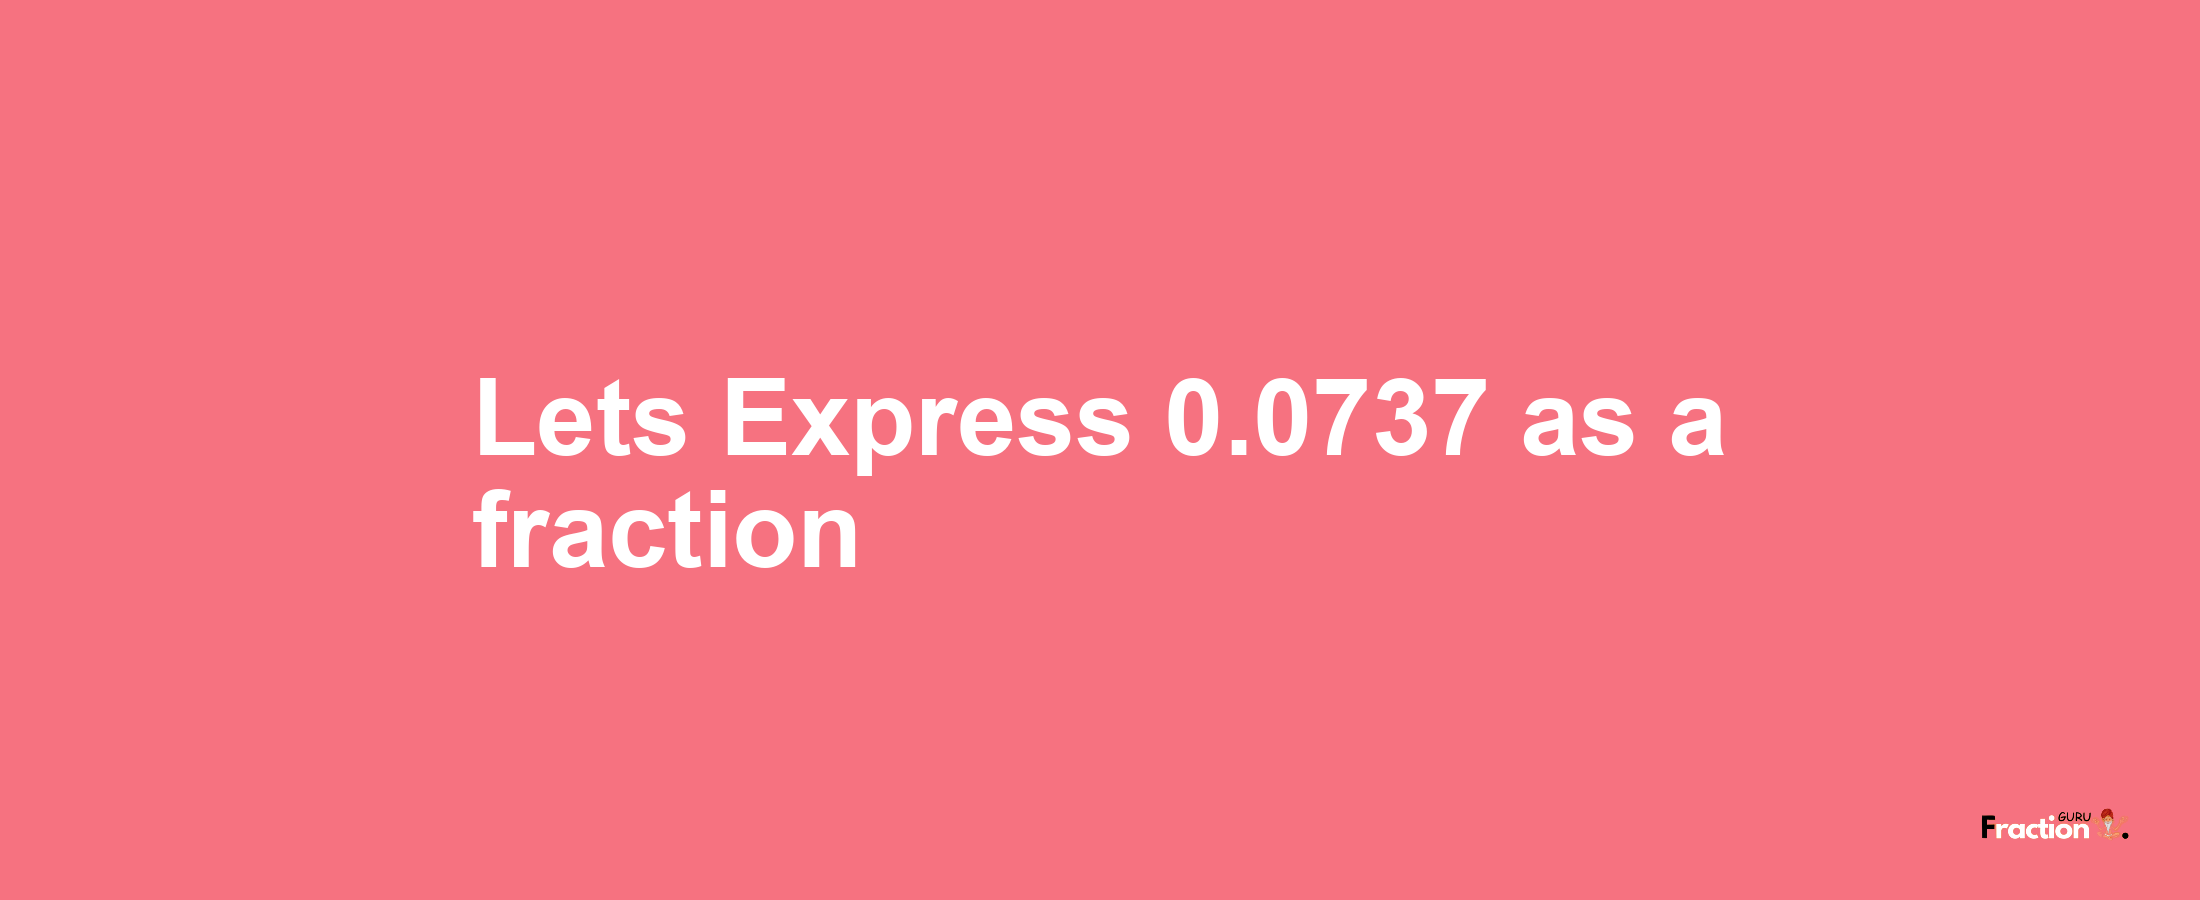 Lets Express 0.0737 as afraction